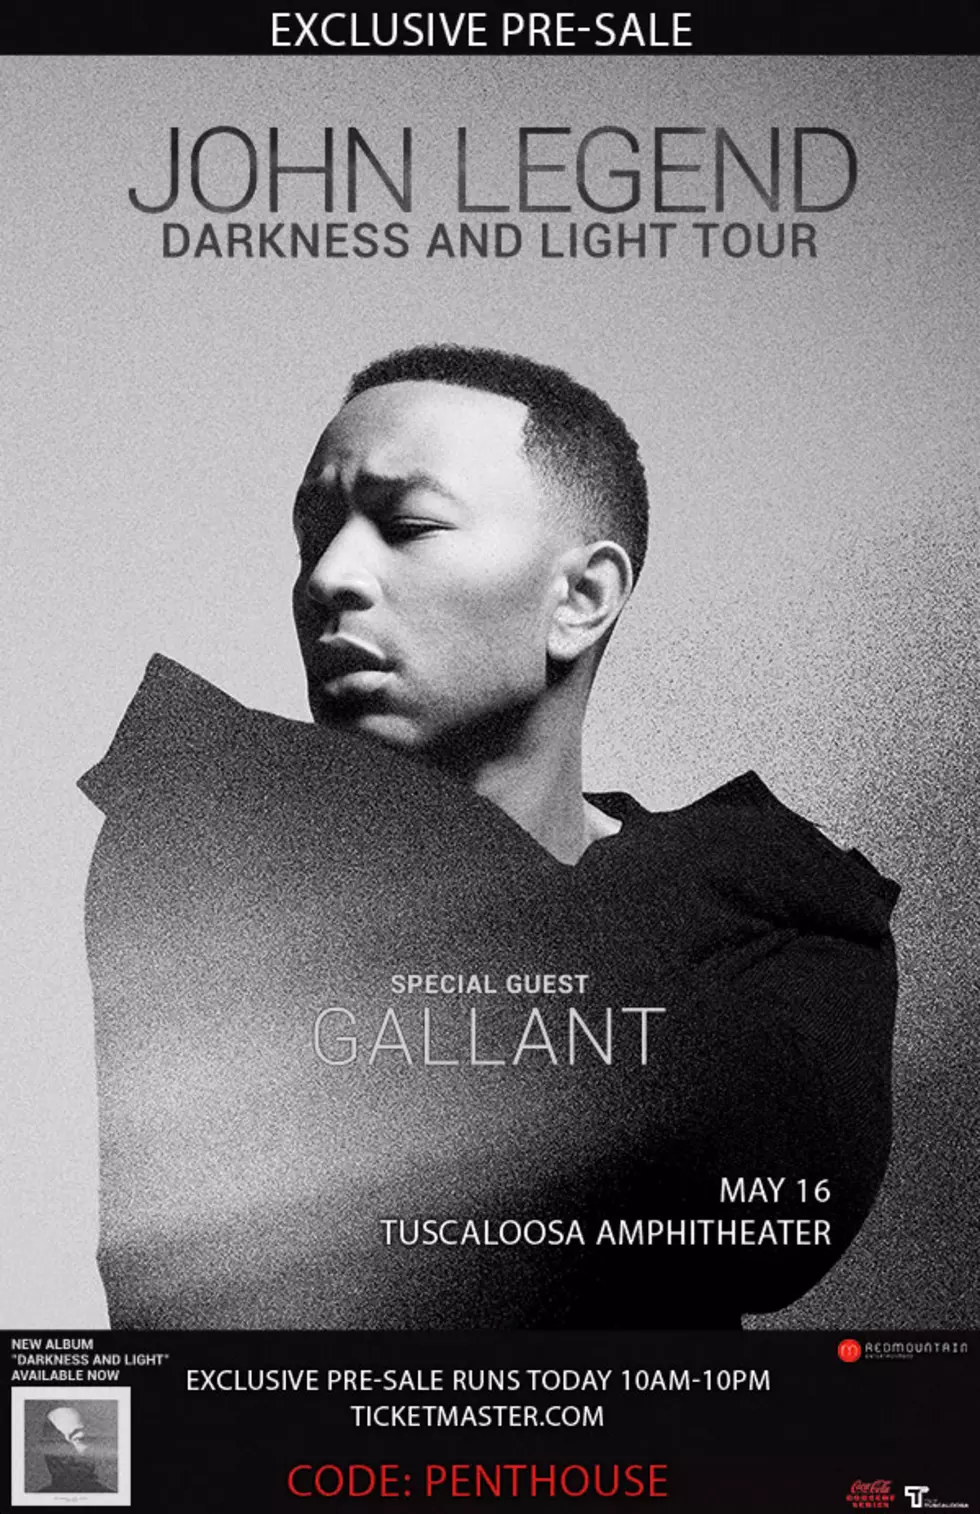 Score Advance Tickets to See John Legend at the Tuscaloosa Amphitheater with Our Exclusive Pre-Sale Code!